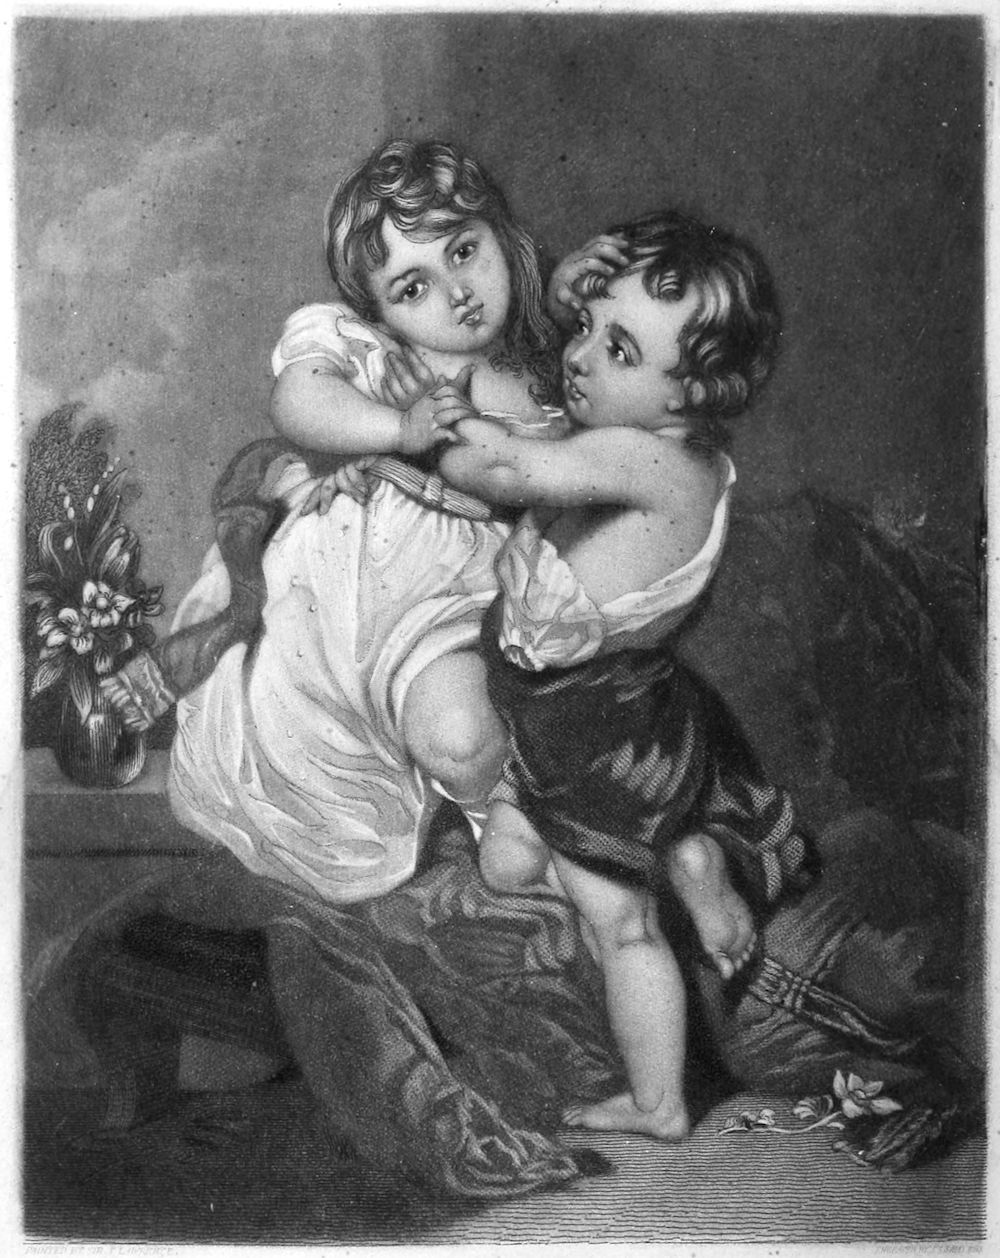 a boy and girl embrace